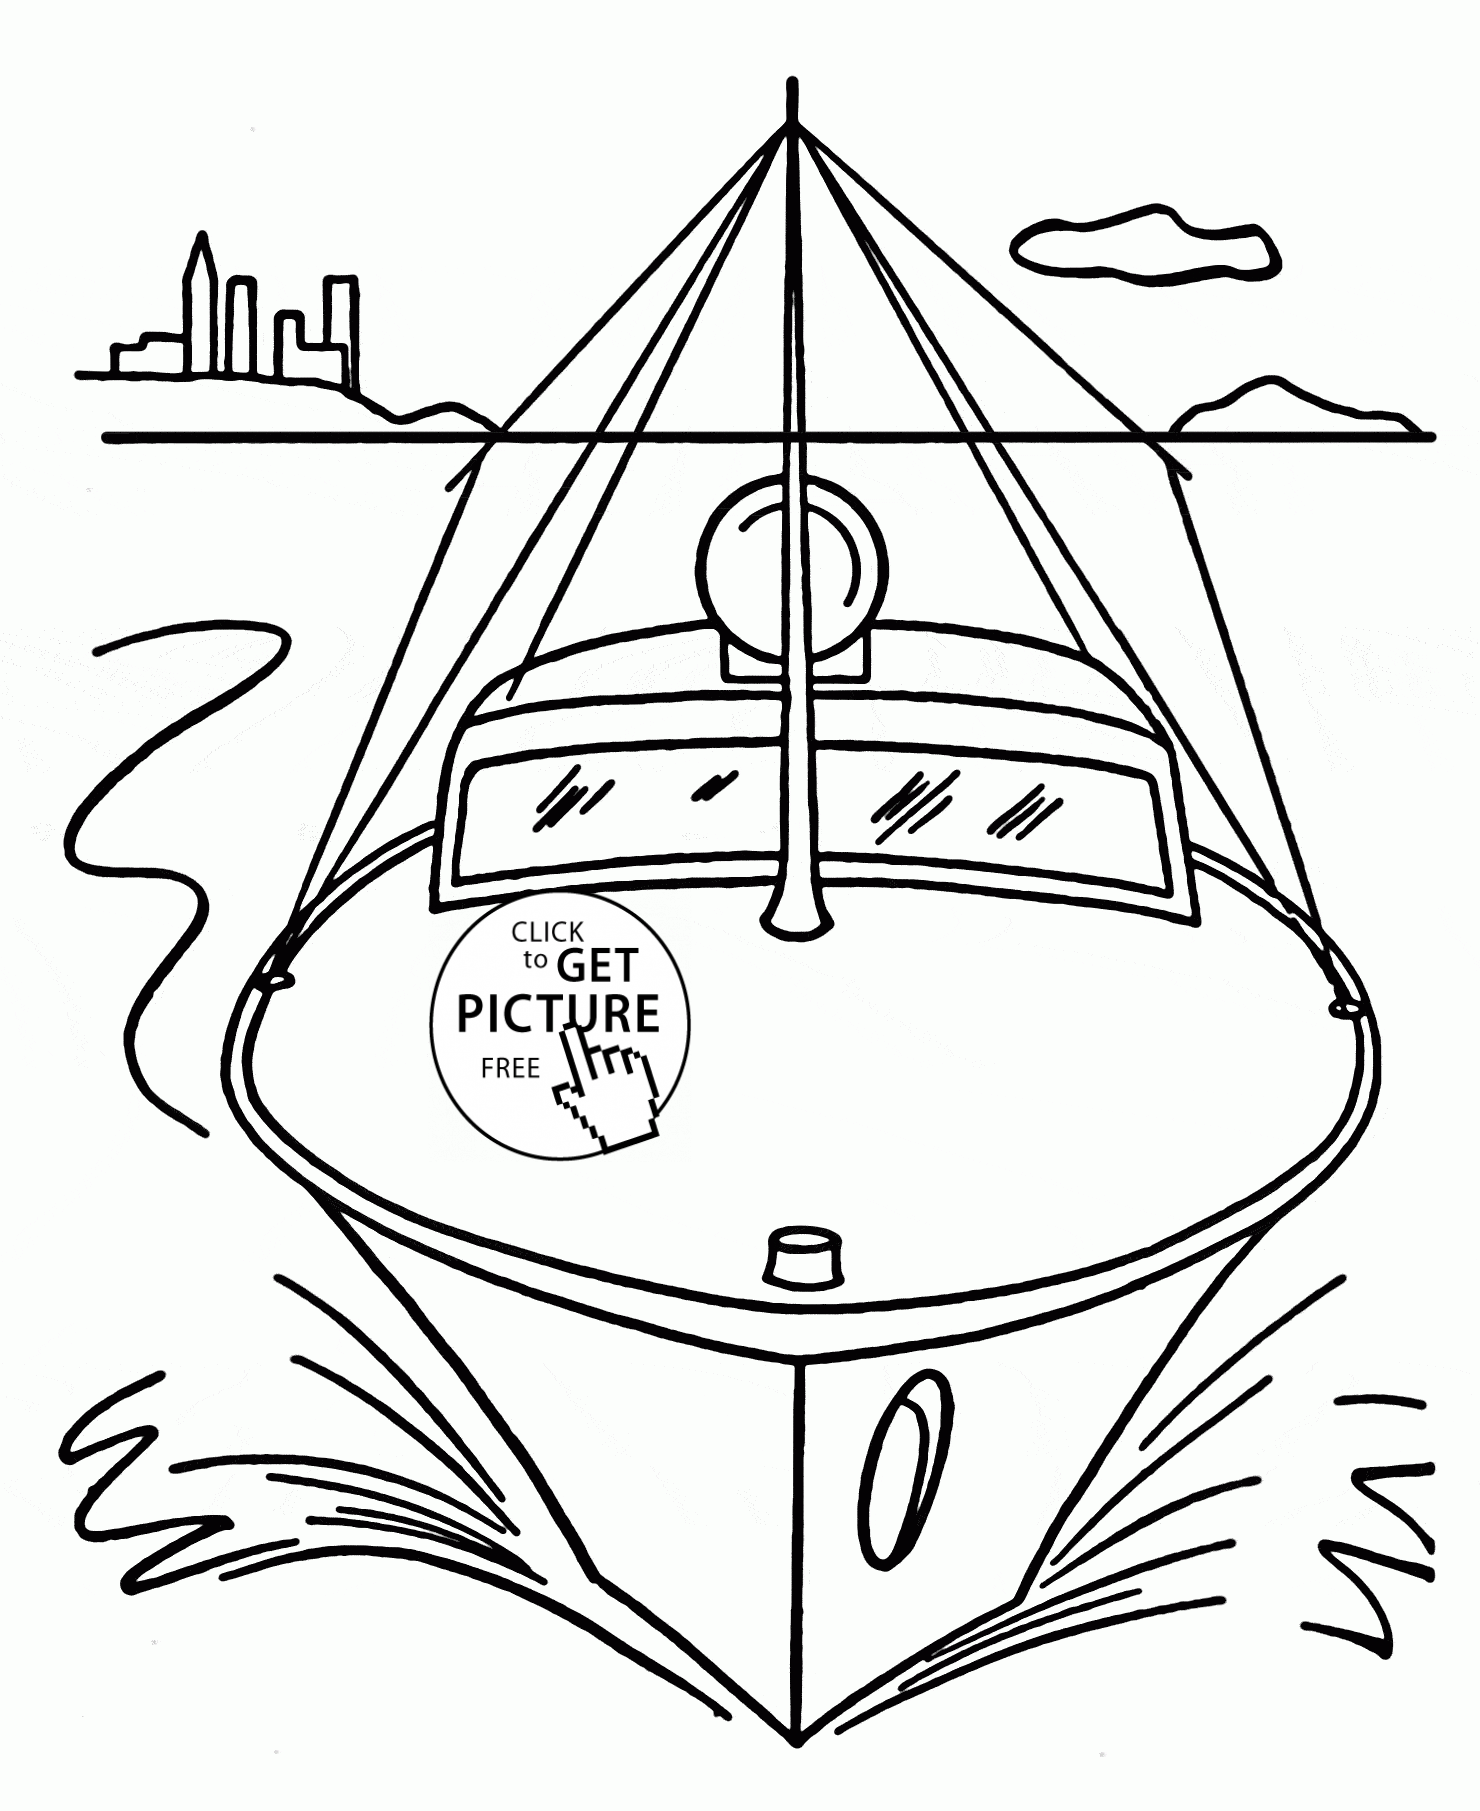 Download Motor Boat Coloring Pages - Coloring Home